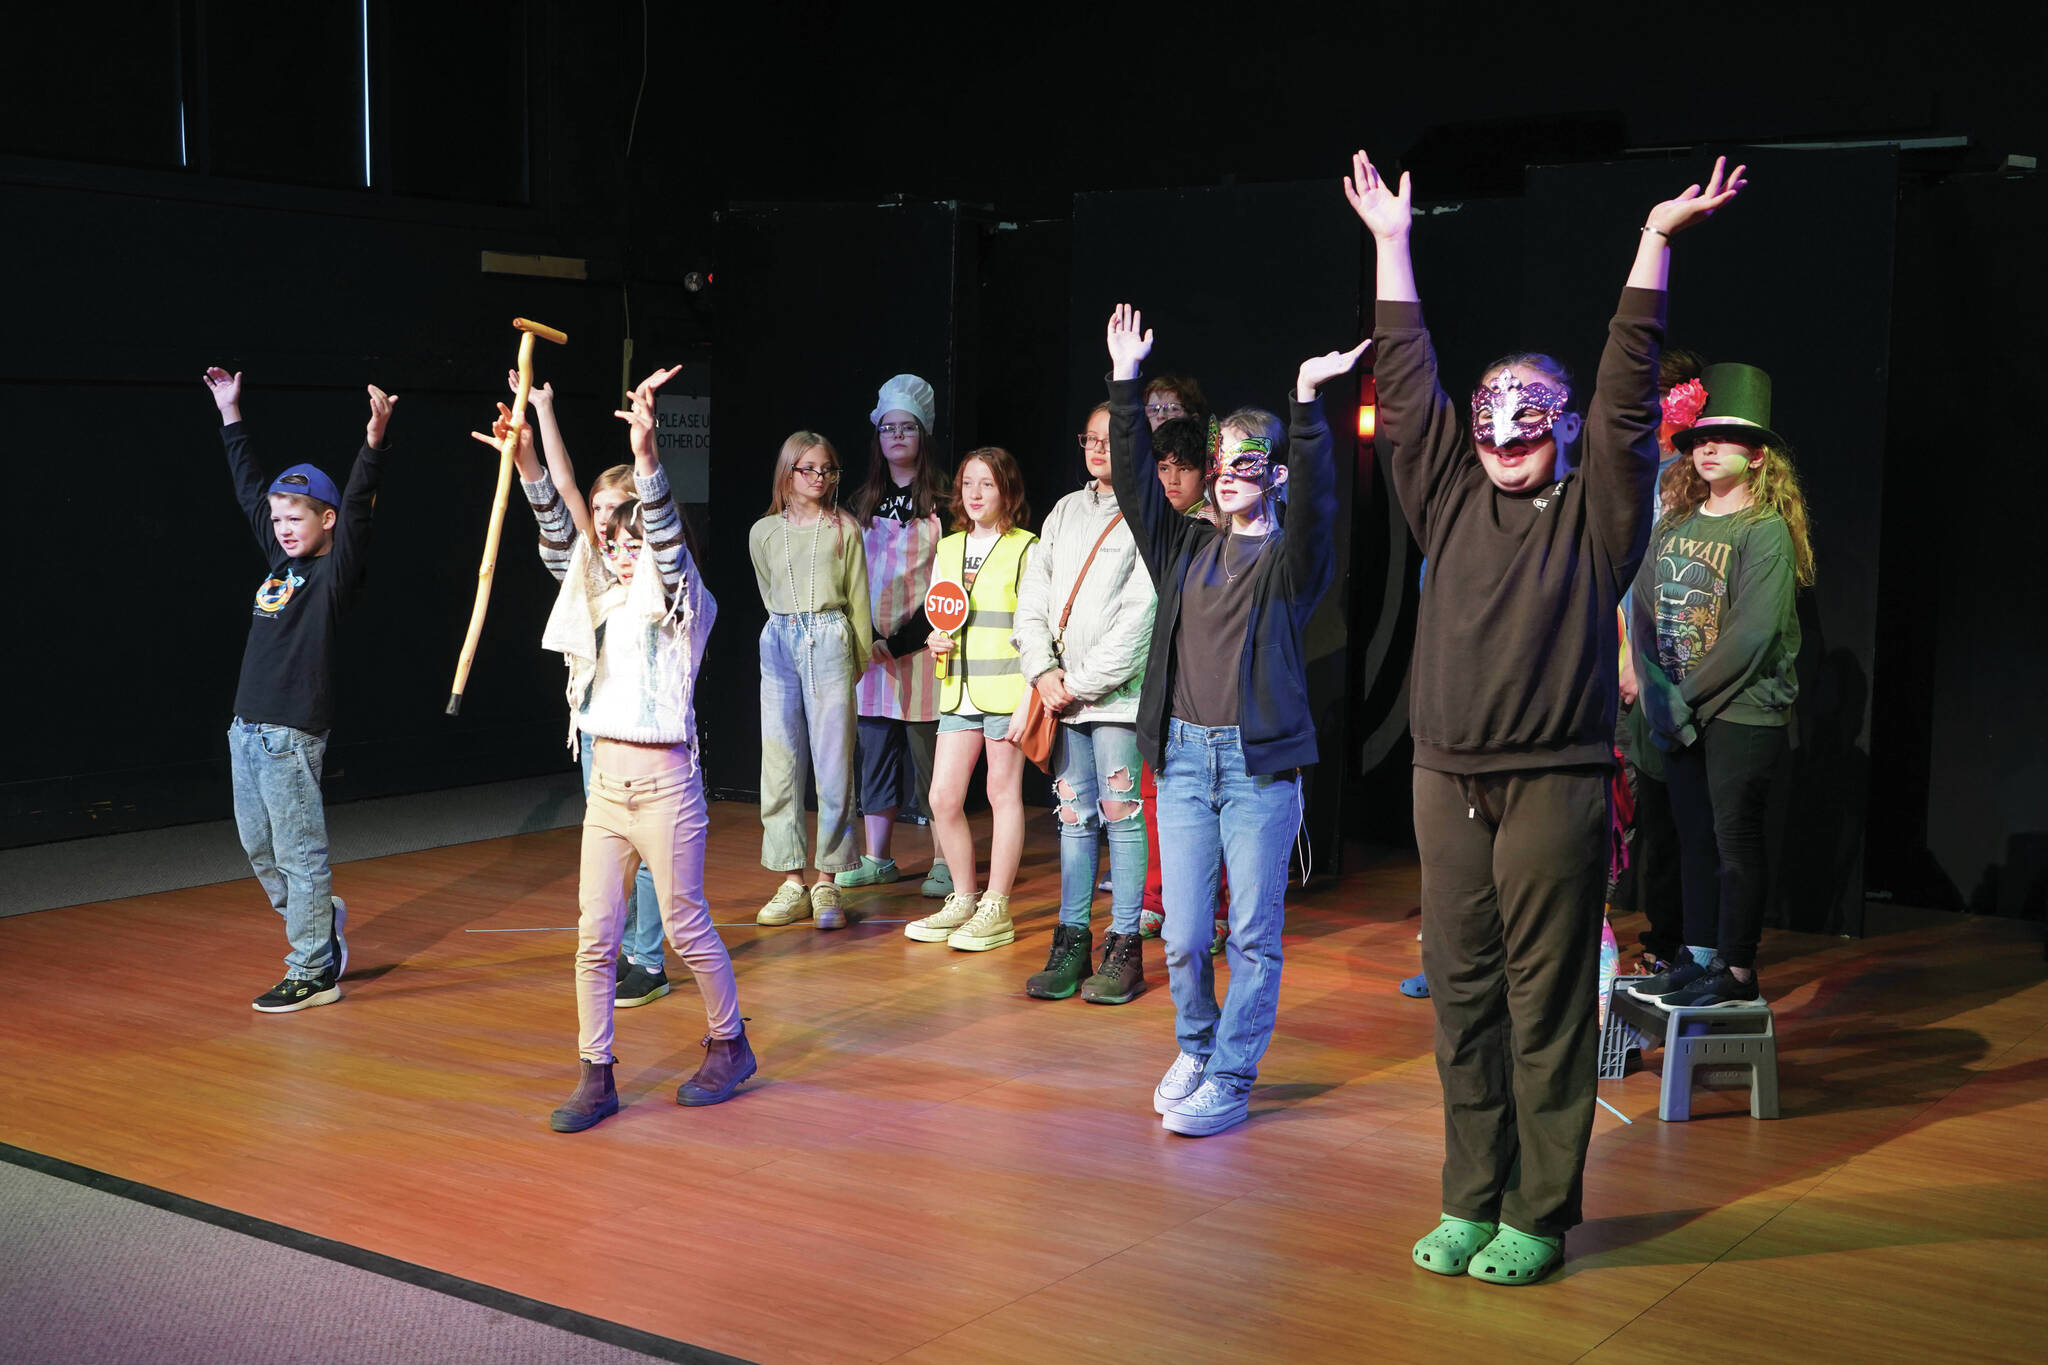 Jake Dye/Peninsula Clarion
Young actors rehearse their production during a drama camp put on by the Kenai Performers in their theater near Soldotna on Thursday.